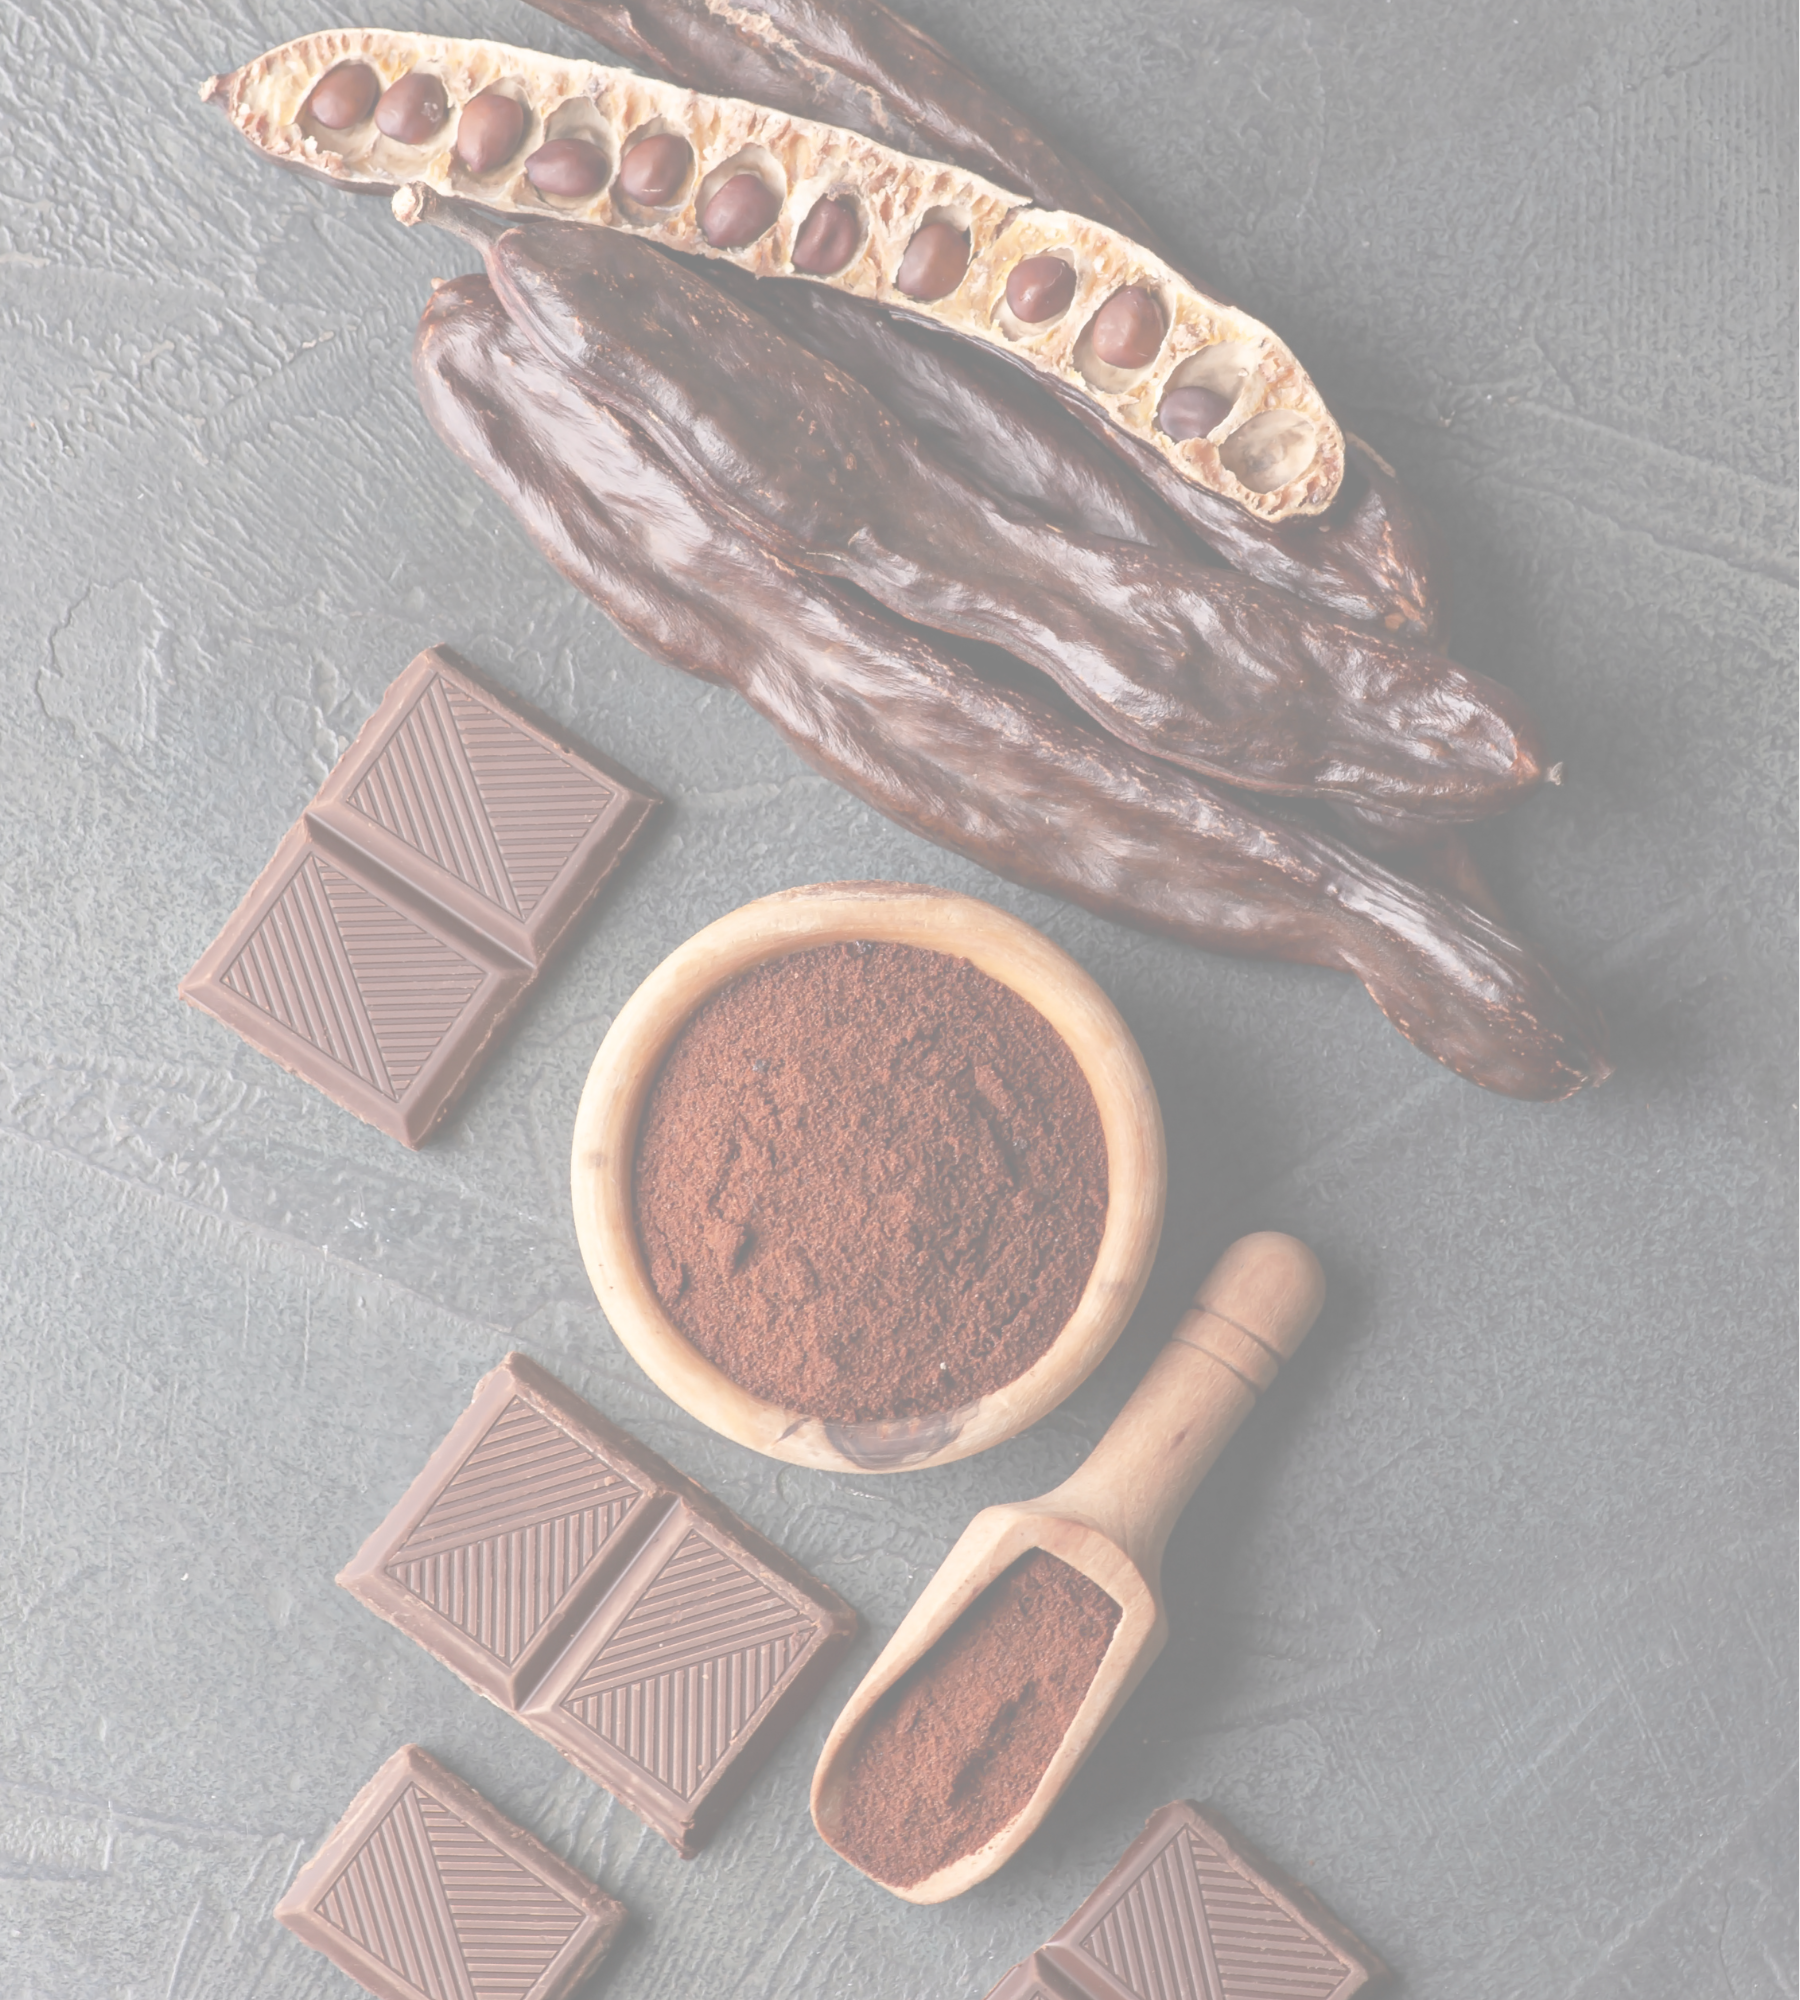 carob vs. chocolate - so which is better?